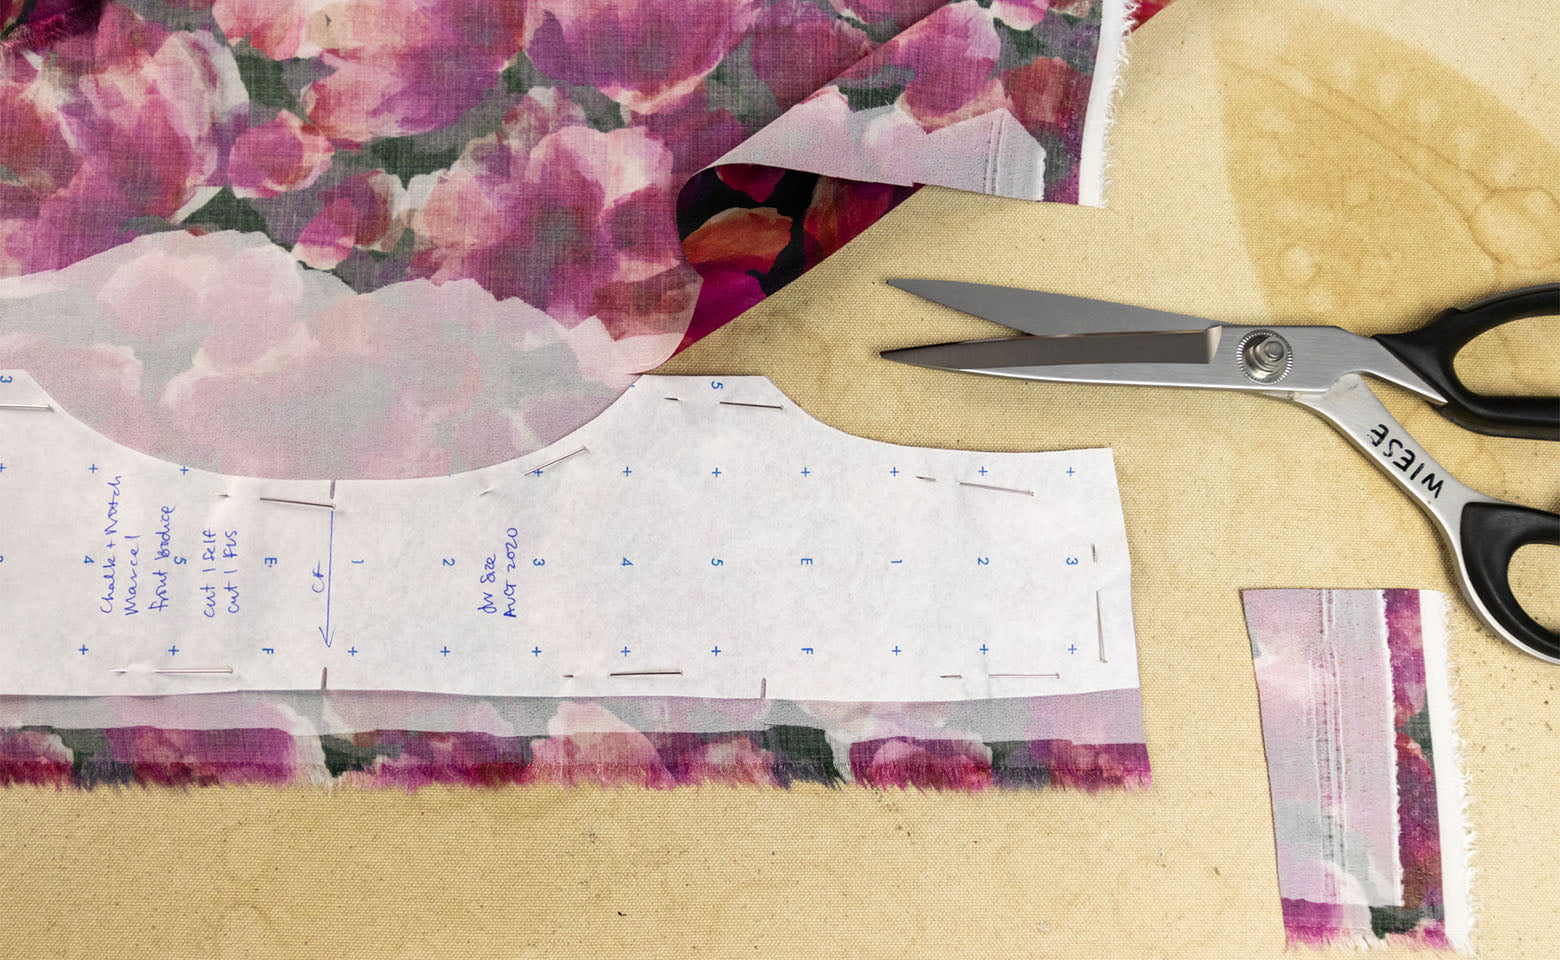 How to Block Fuse Fabric - Your block-fused fabric is now ready to cut